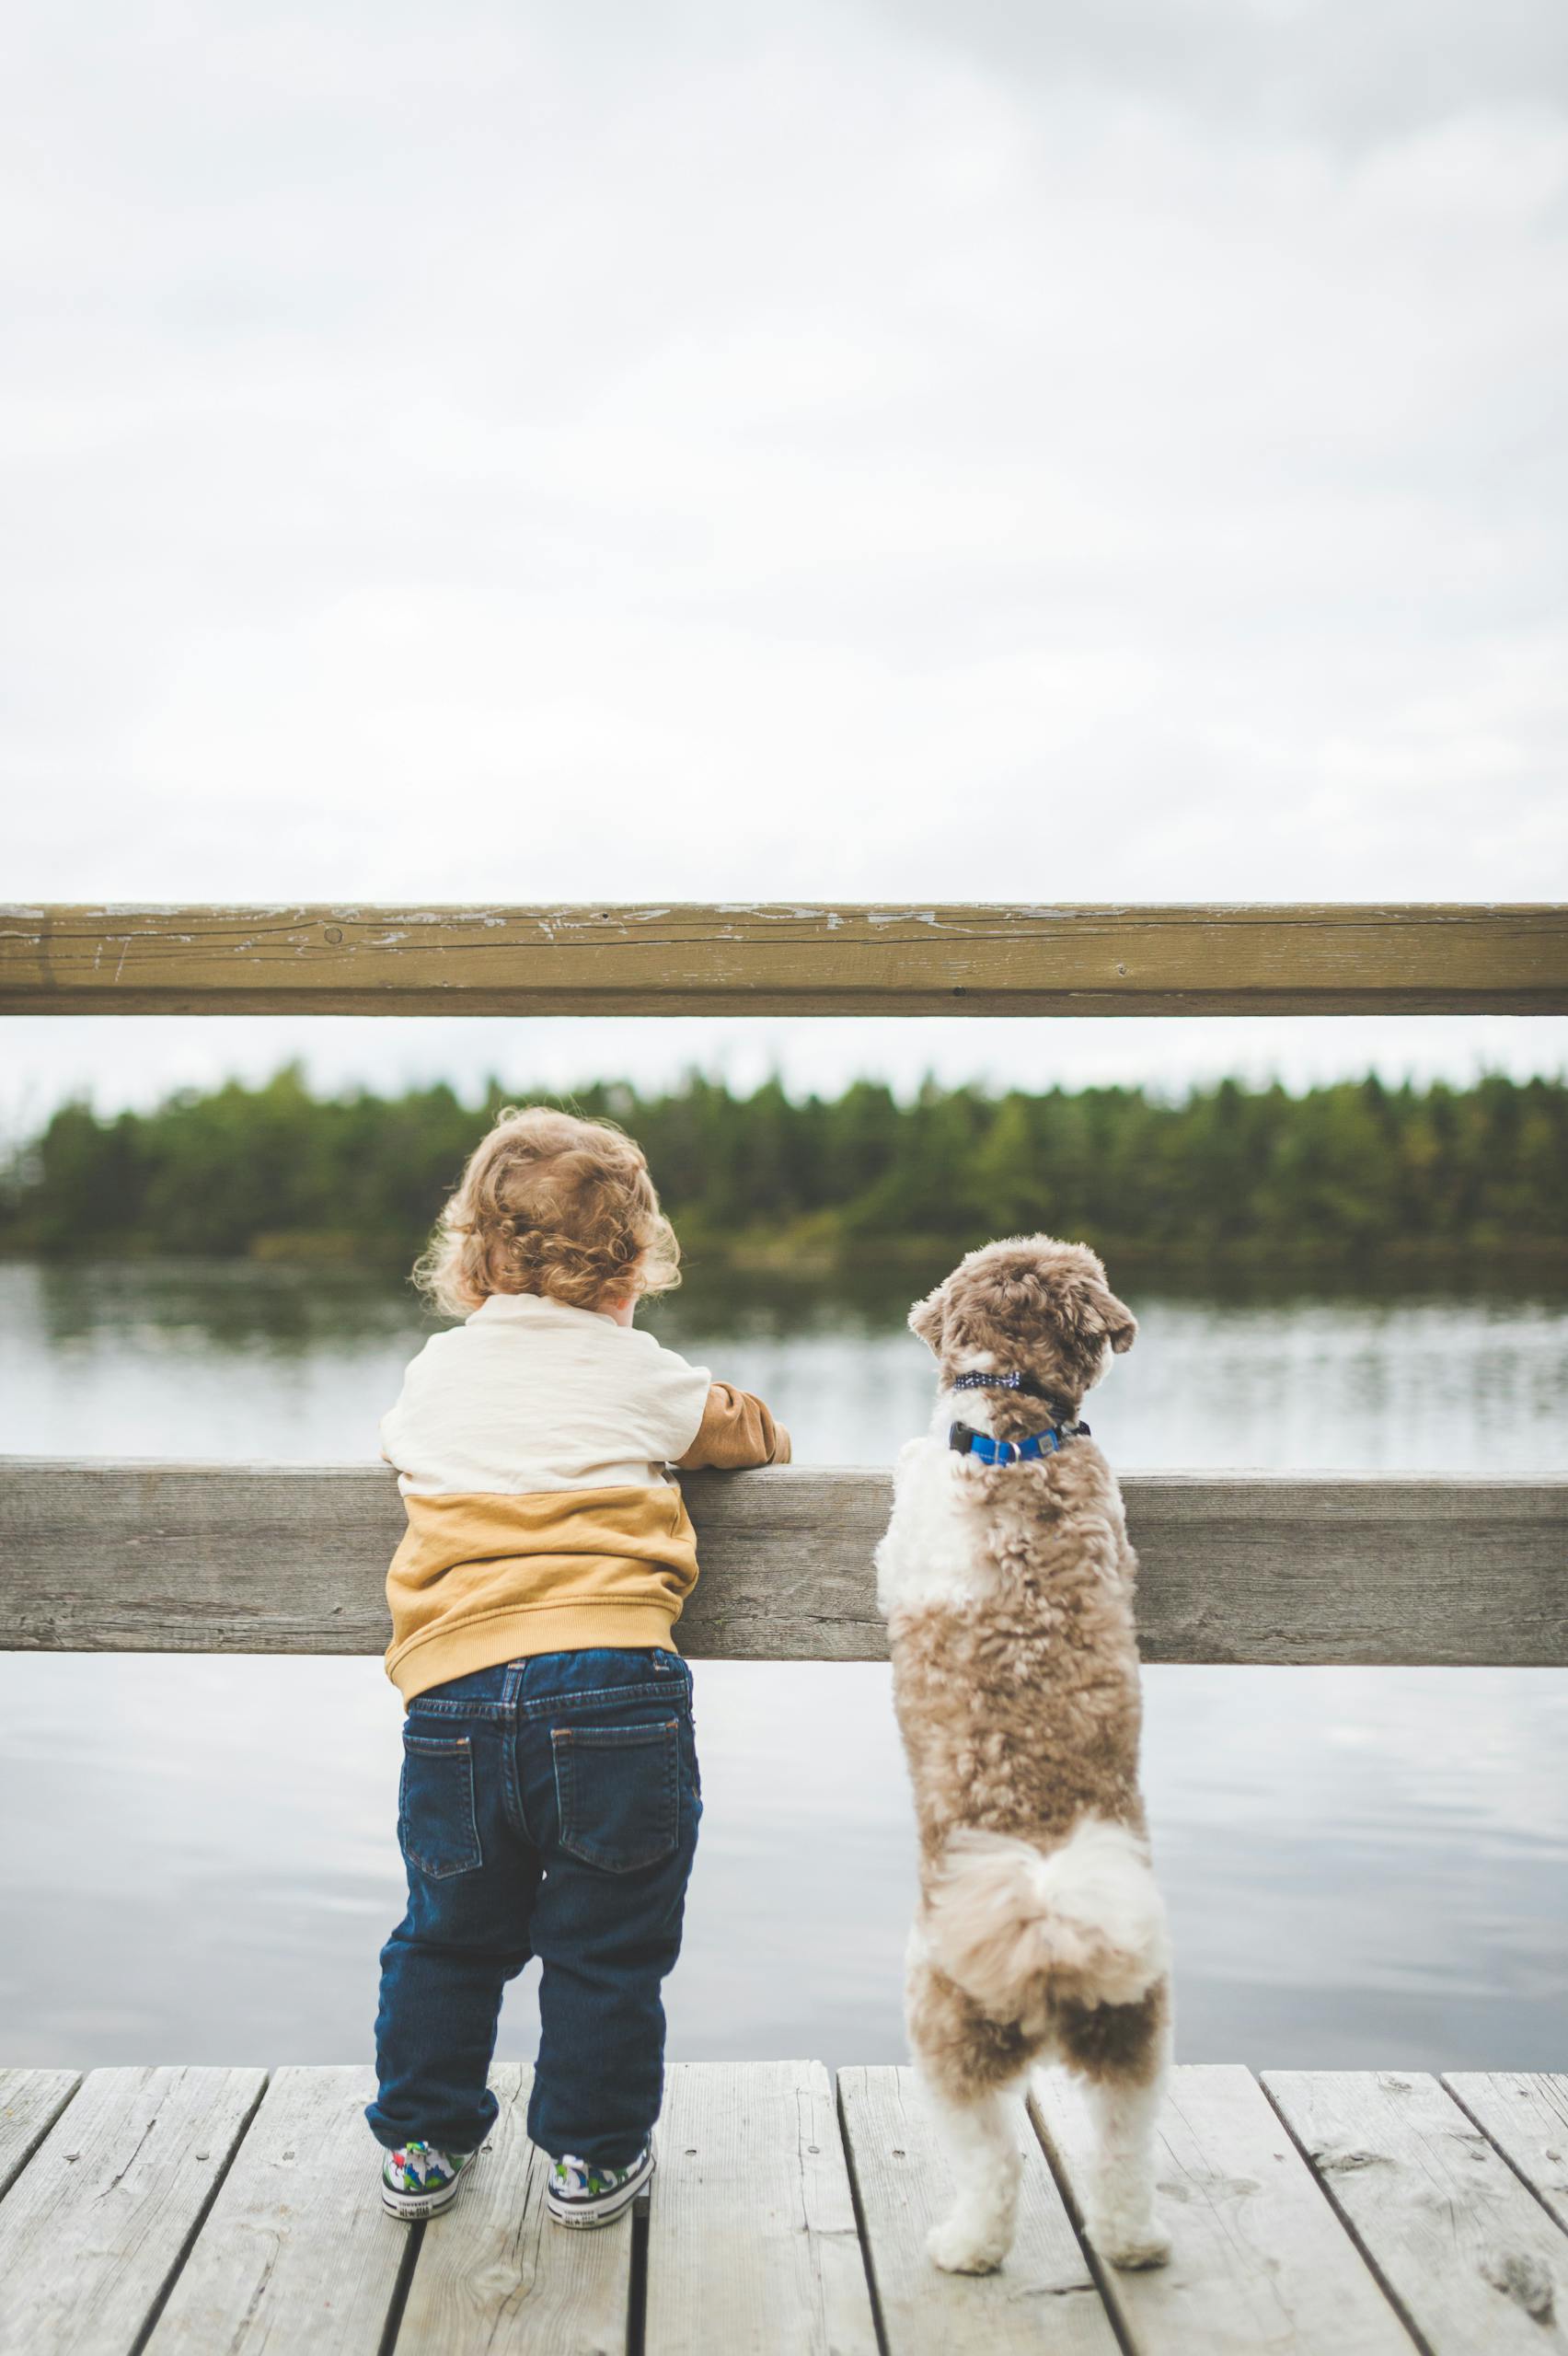 Toddler and Dog Standing by the Wooden Fence